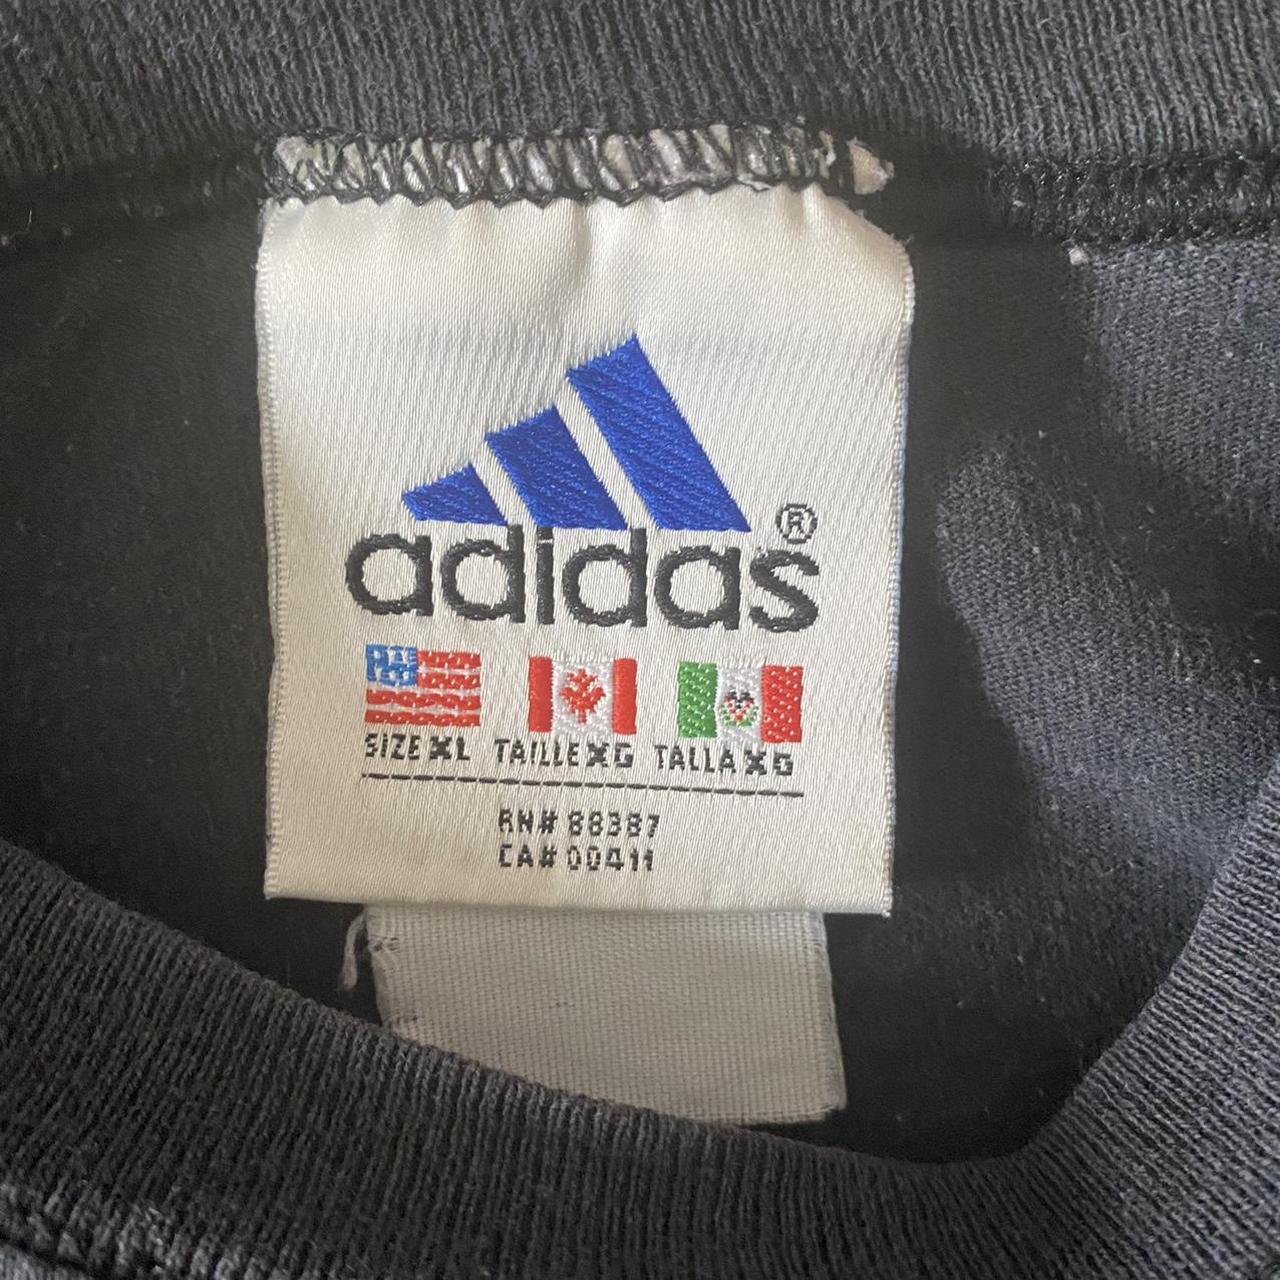 Product Image 2 - Vintage Adidas: LS
Size: XL
Condition: 10/10

This